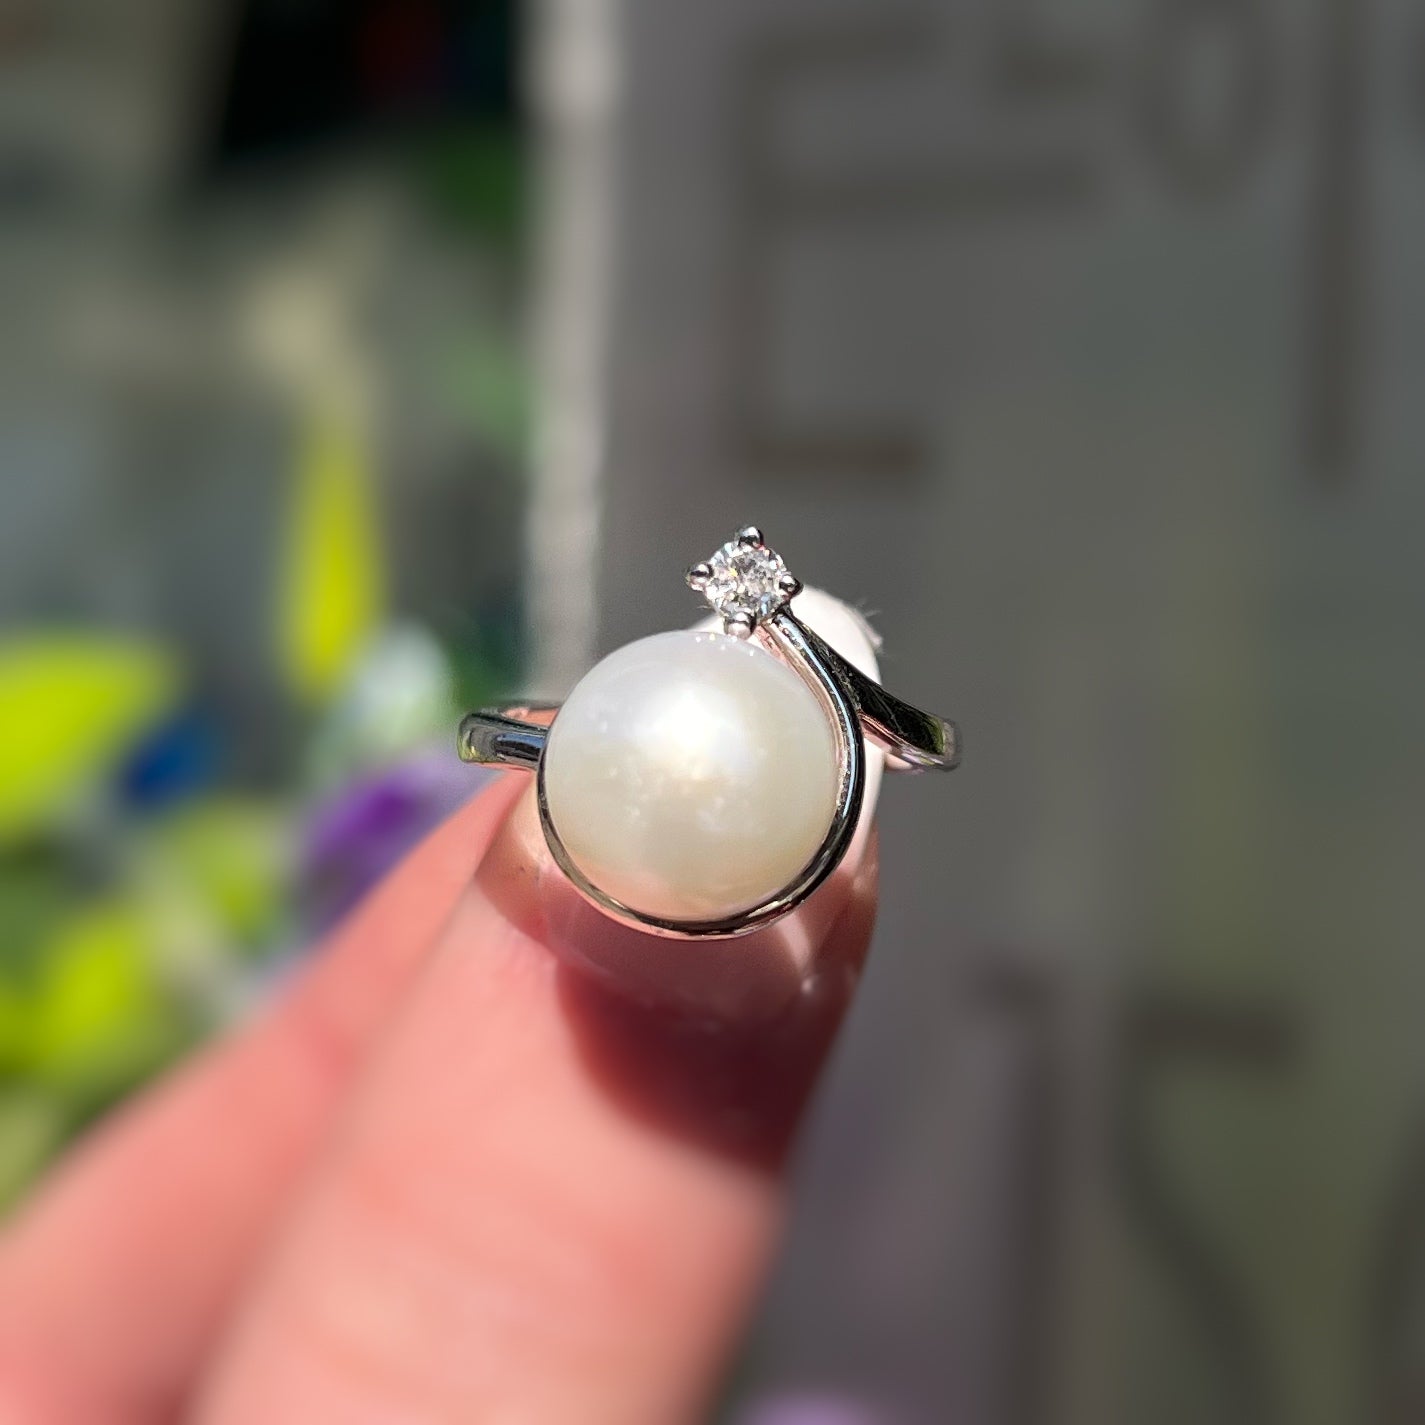 Sterling Silver Cubic Zirconia and Pearl Swirl Ring - M 1/2